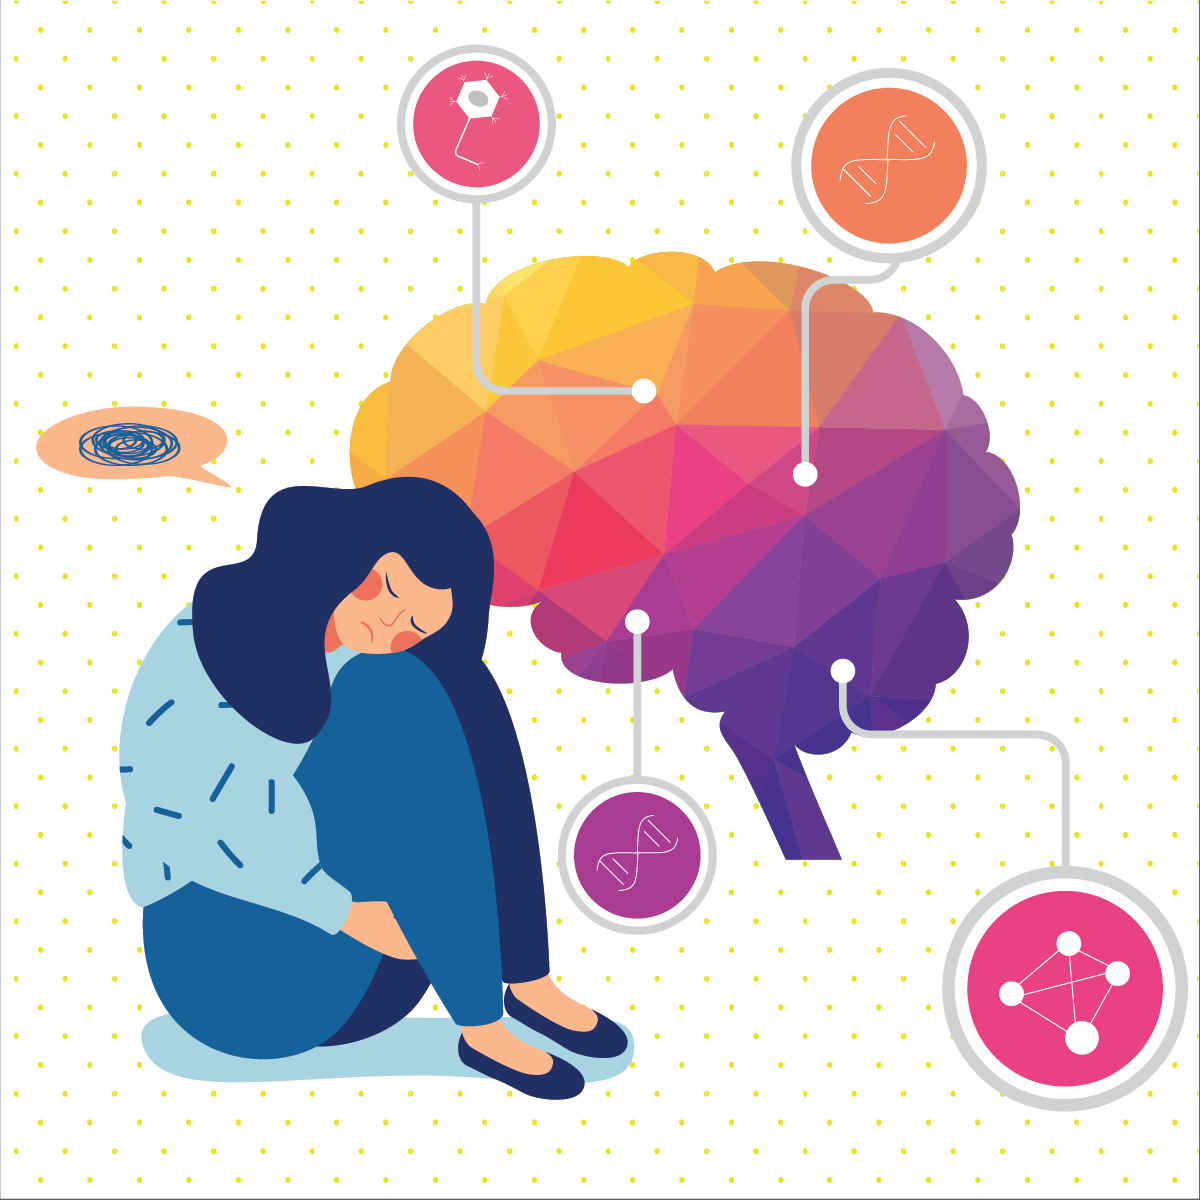 Linking genes and brain circuitry in anxiety disorders